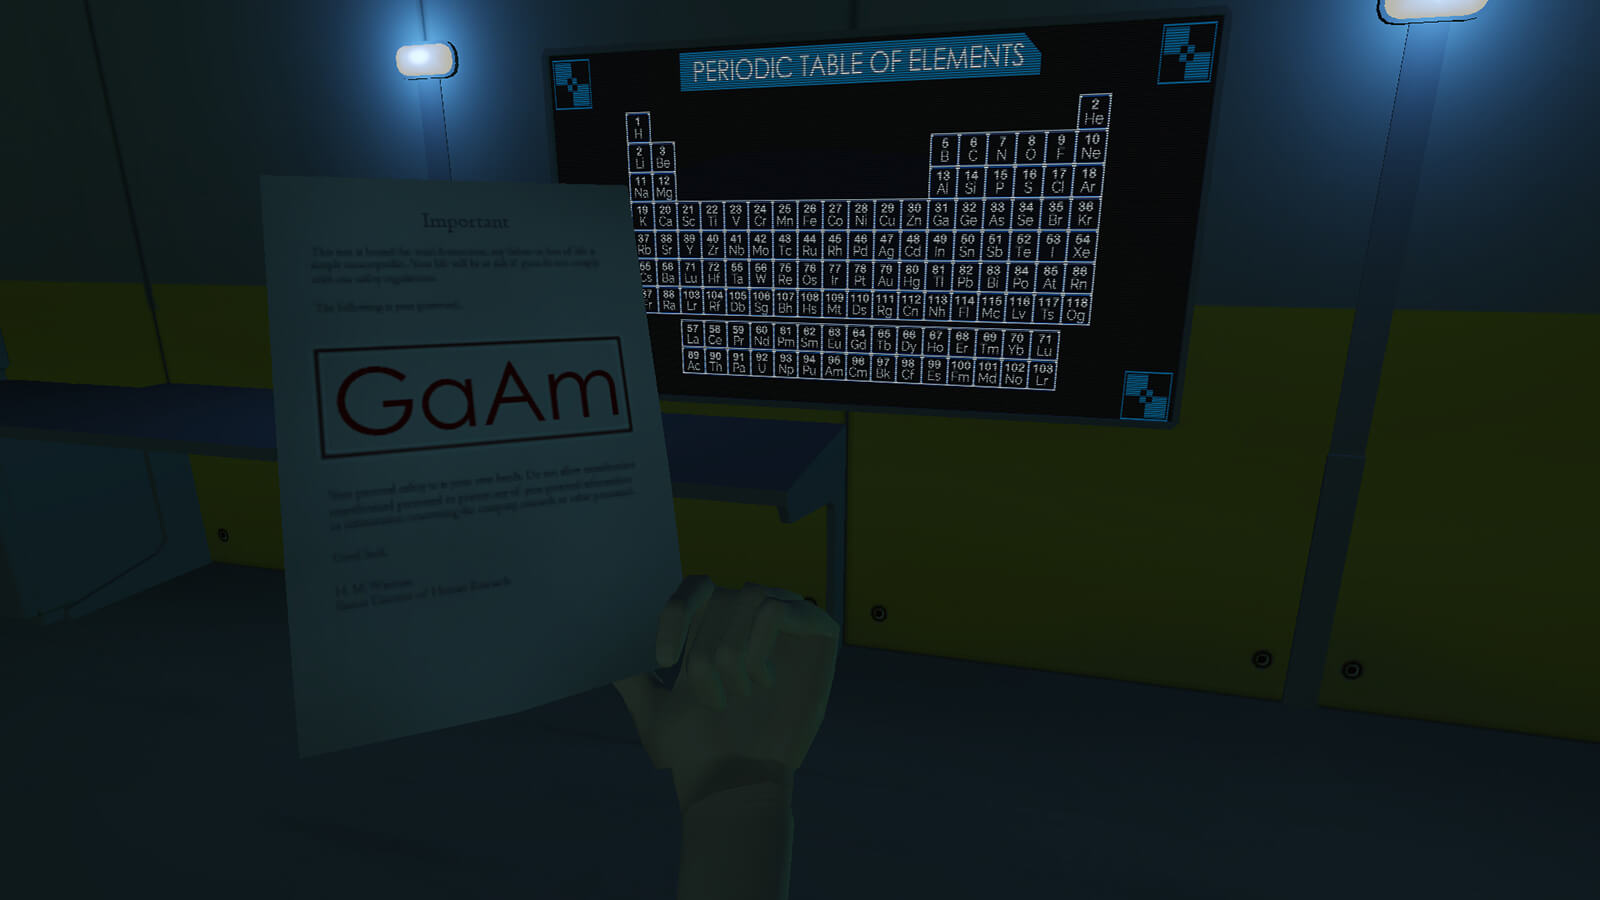 In a dark room, a sheet of paper reading "GaAm" is held up to a black-and-blue Periodic Table of Elements poster on the wall.